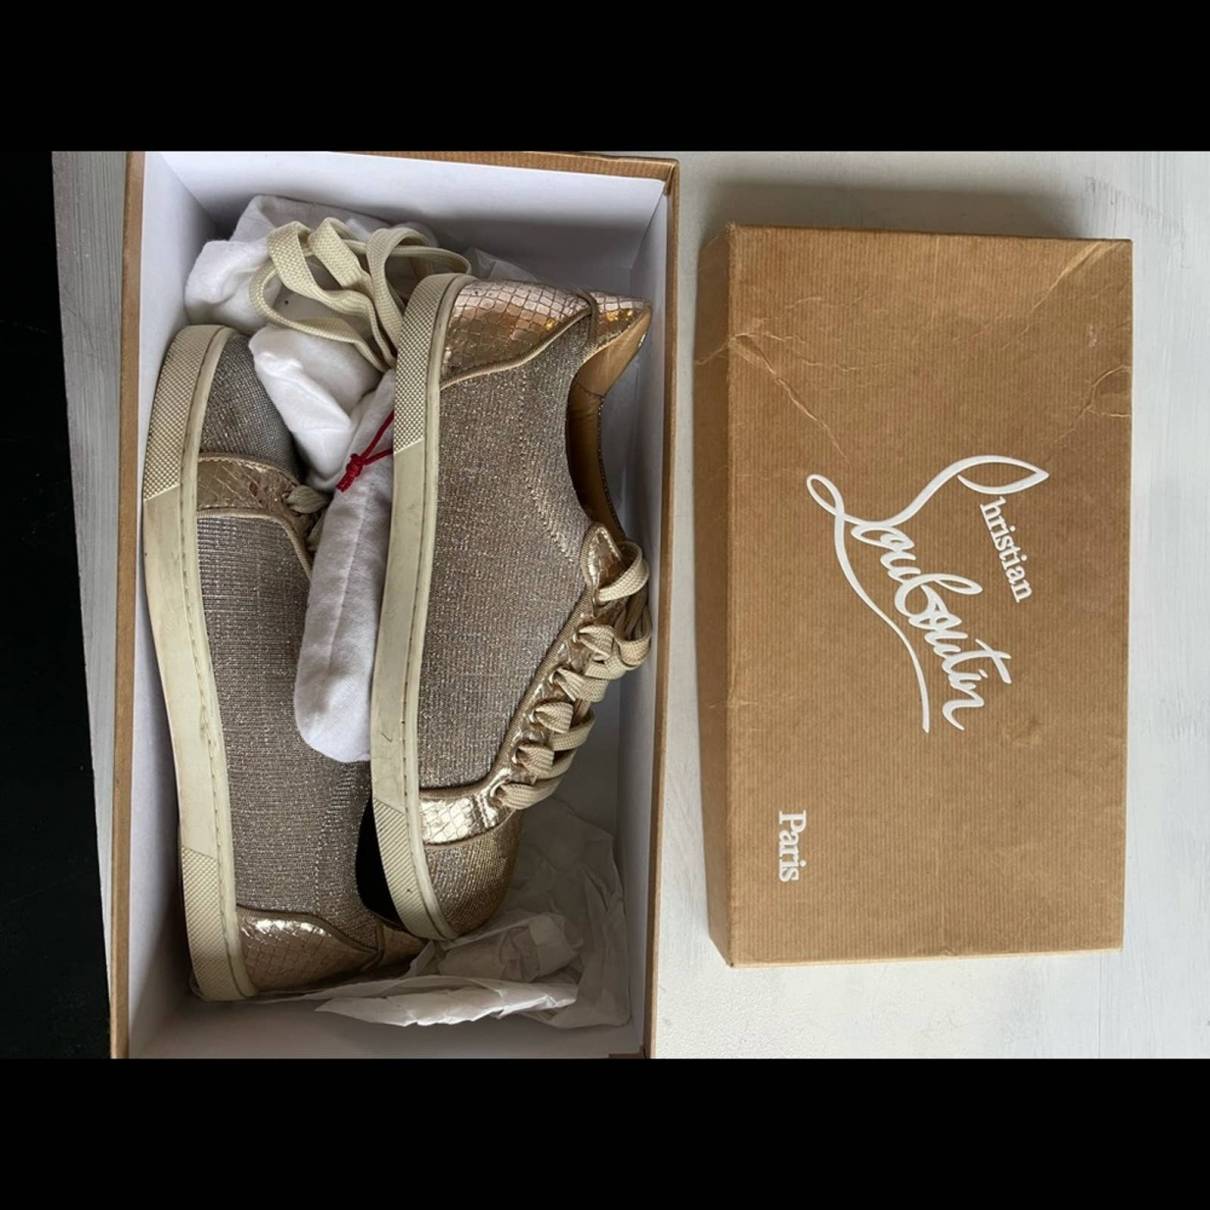 Christian Louboutin - Authenticated Trainer - Water Snake Gold for Women, Good Condition